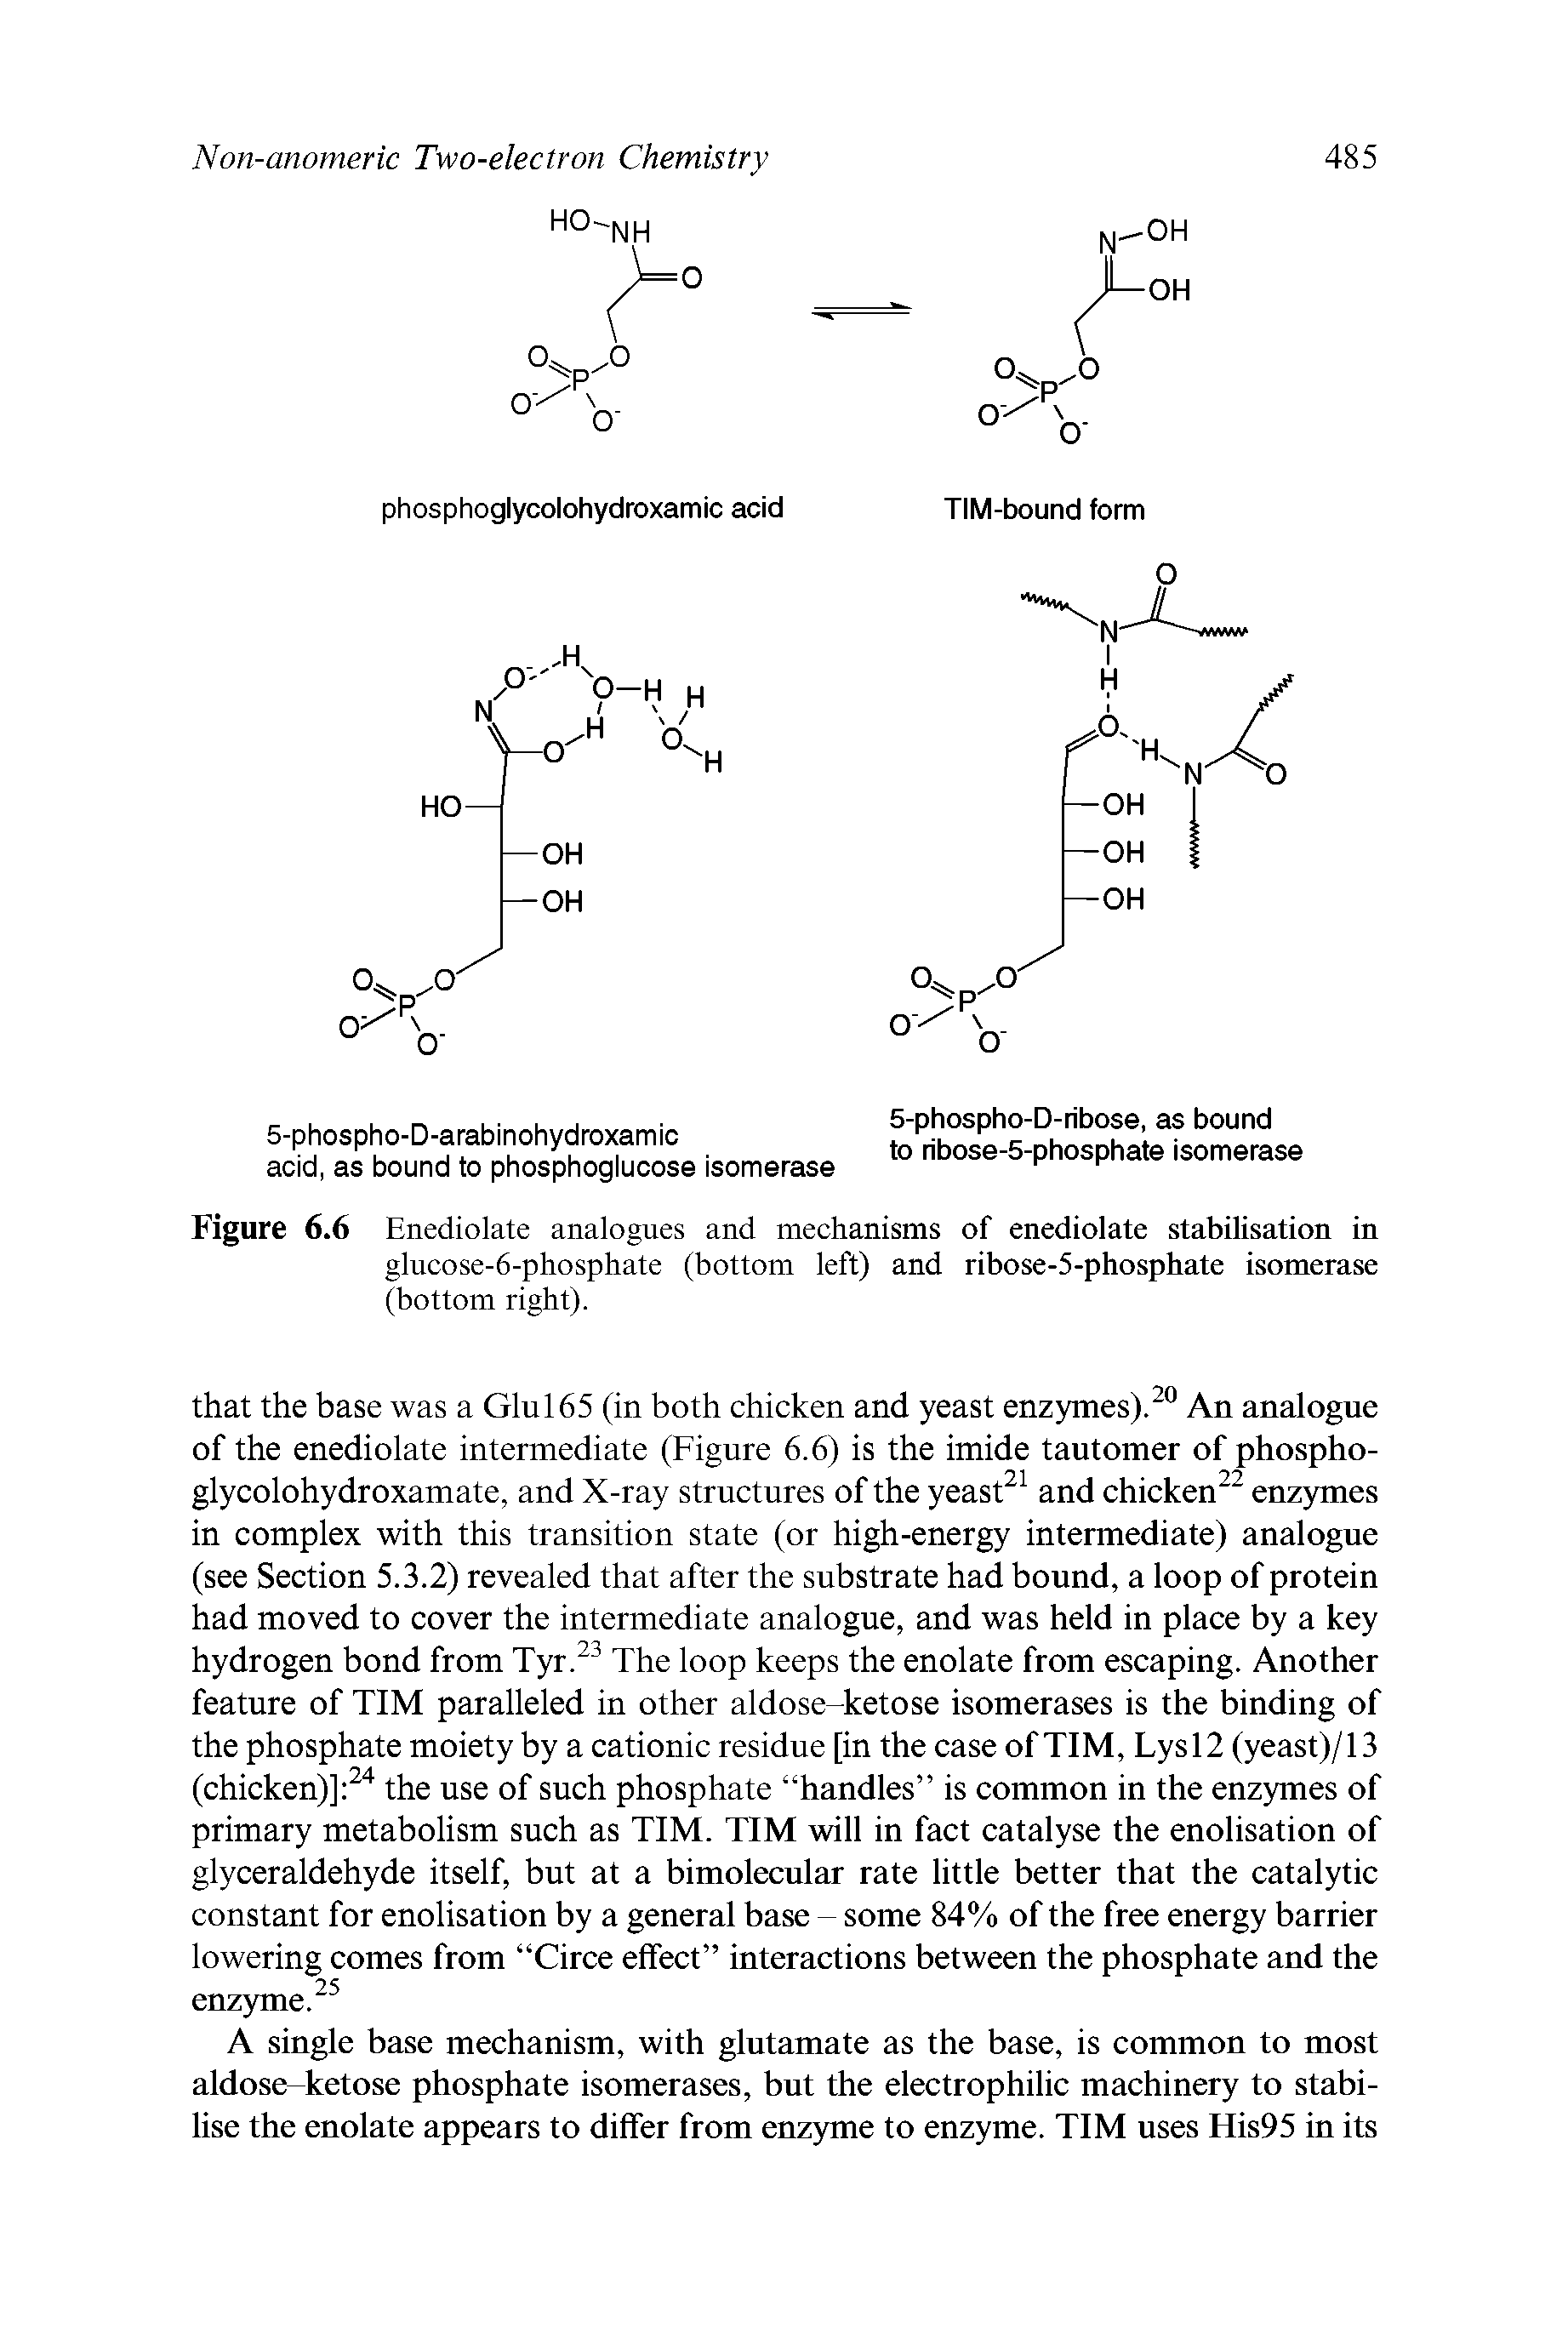 Figure 6.6 Enediolate analogues and mechanisms of enediolate stabilisation in glucose-6-phosphate (bottom left) and ribose-5-phosphate isomerase (bottom right).